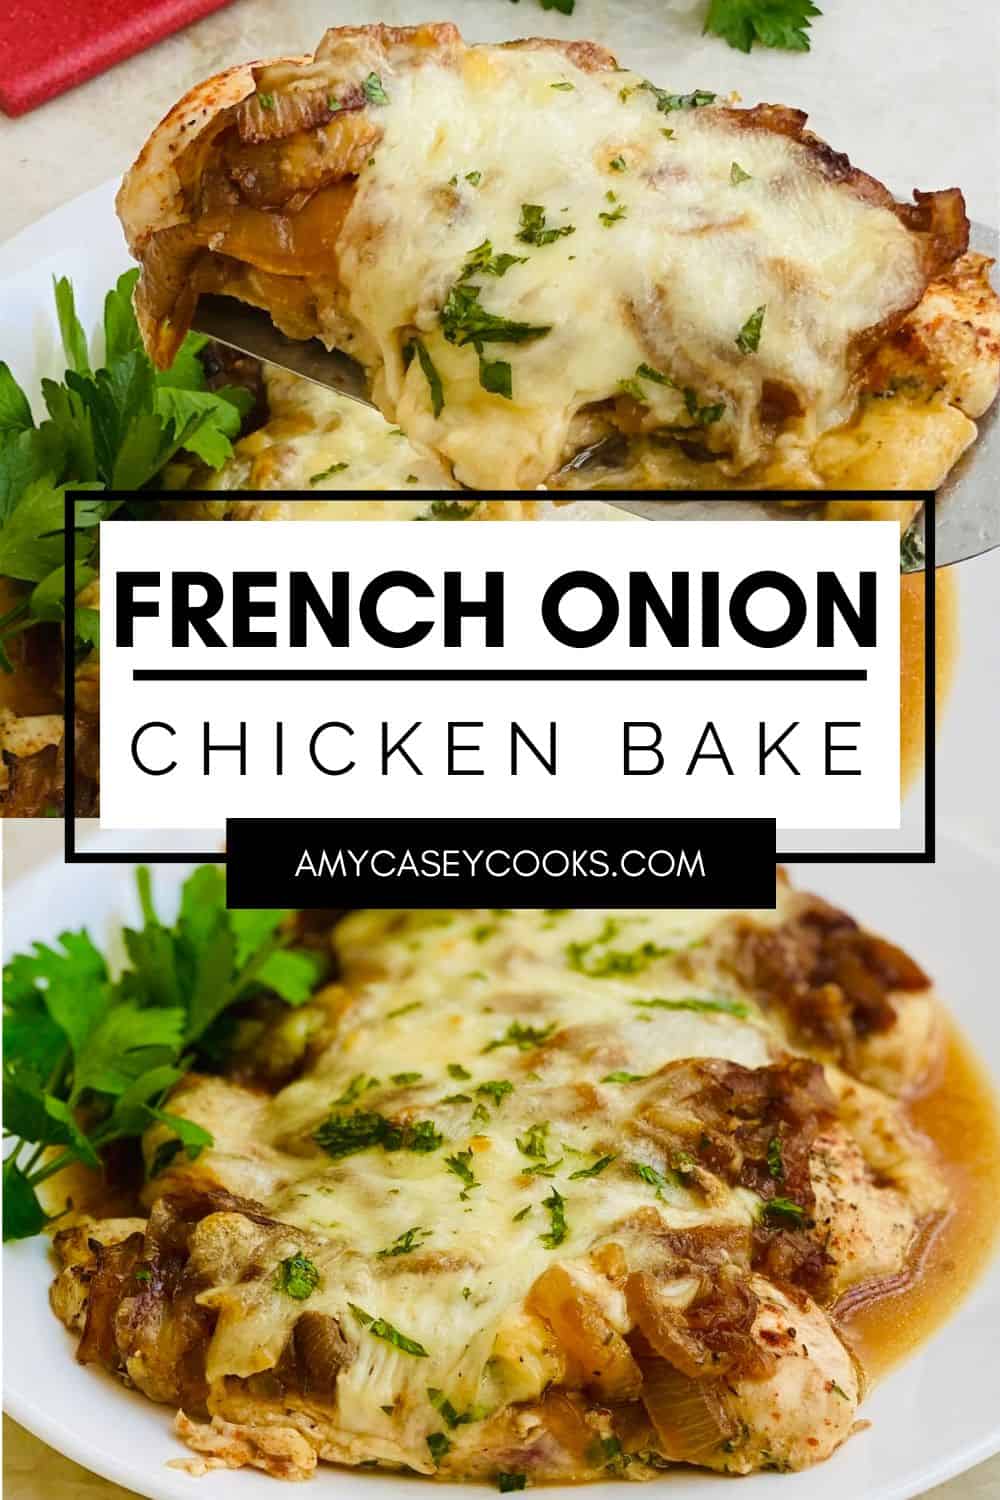 French onion chicken bake with melted cheese.